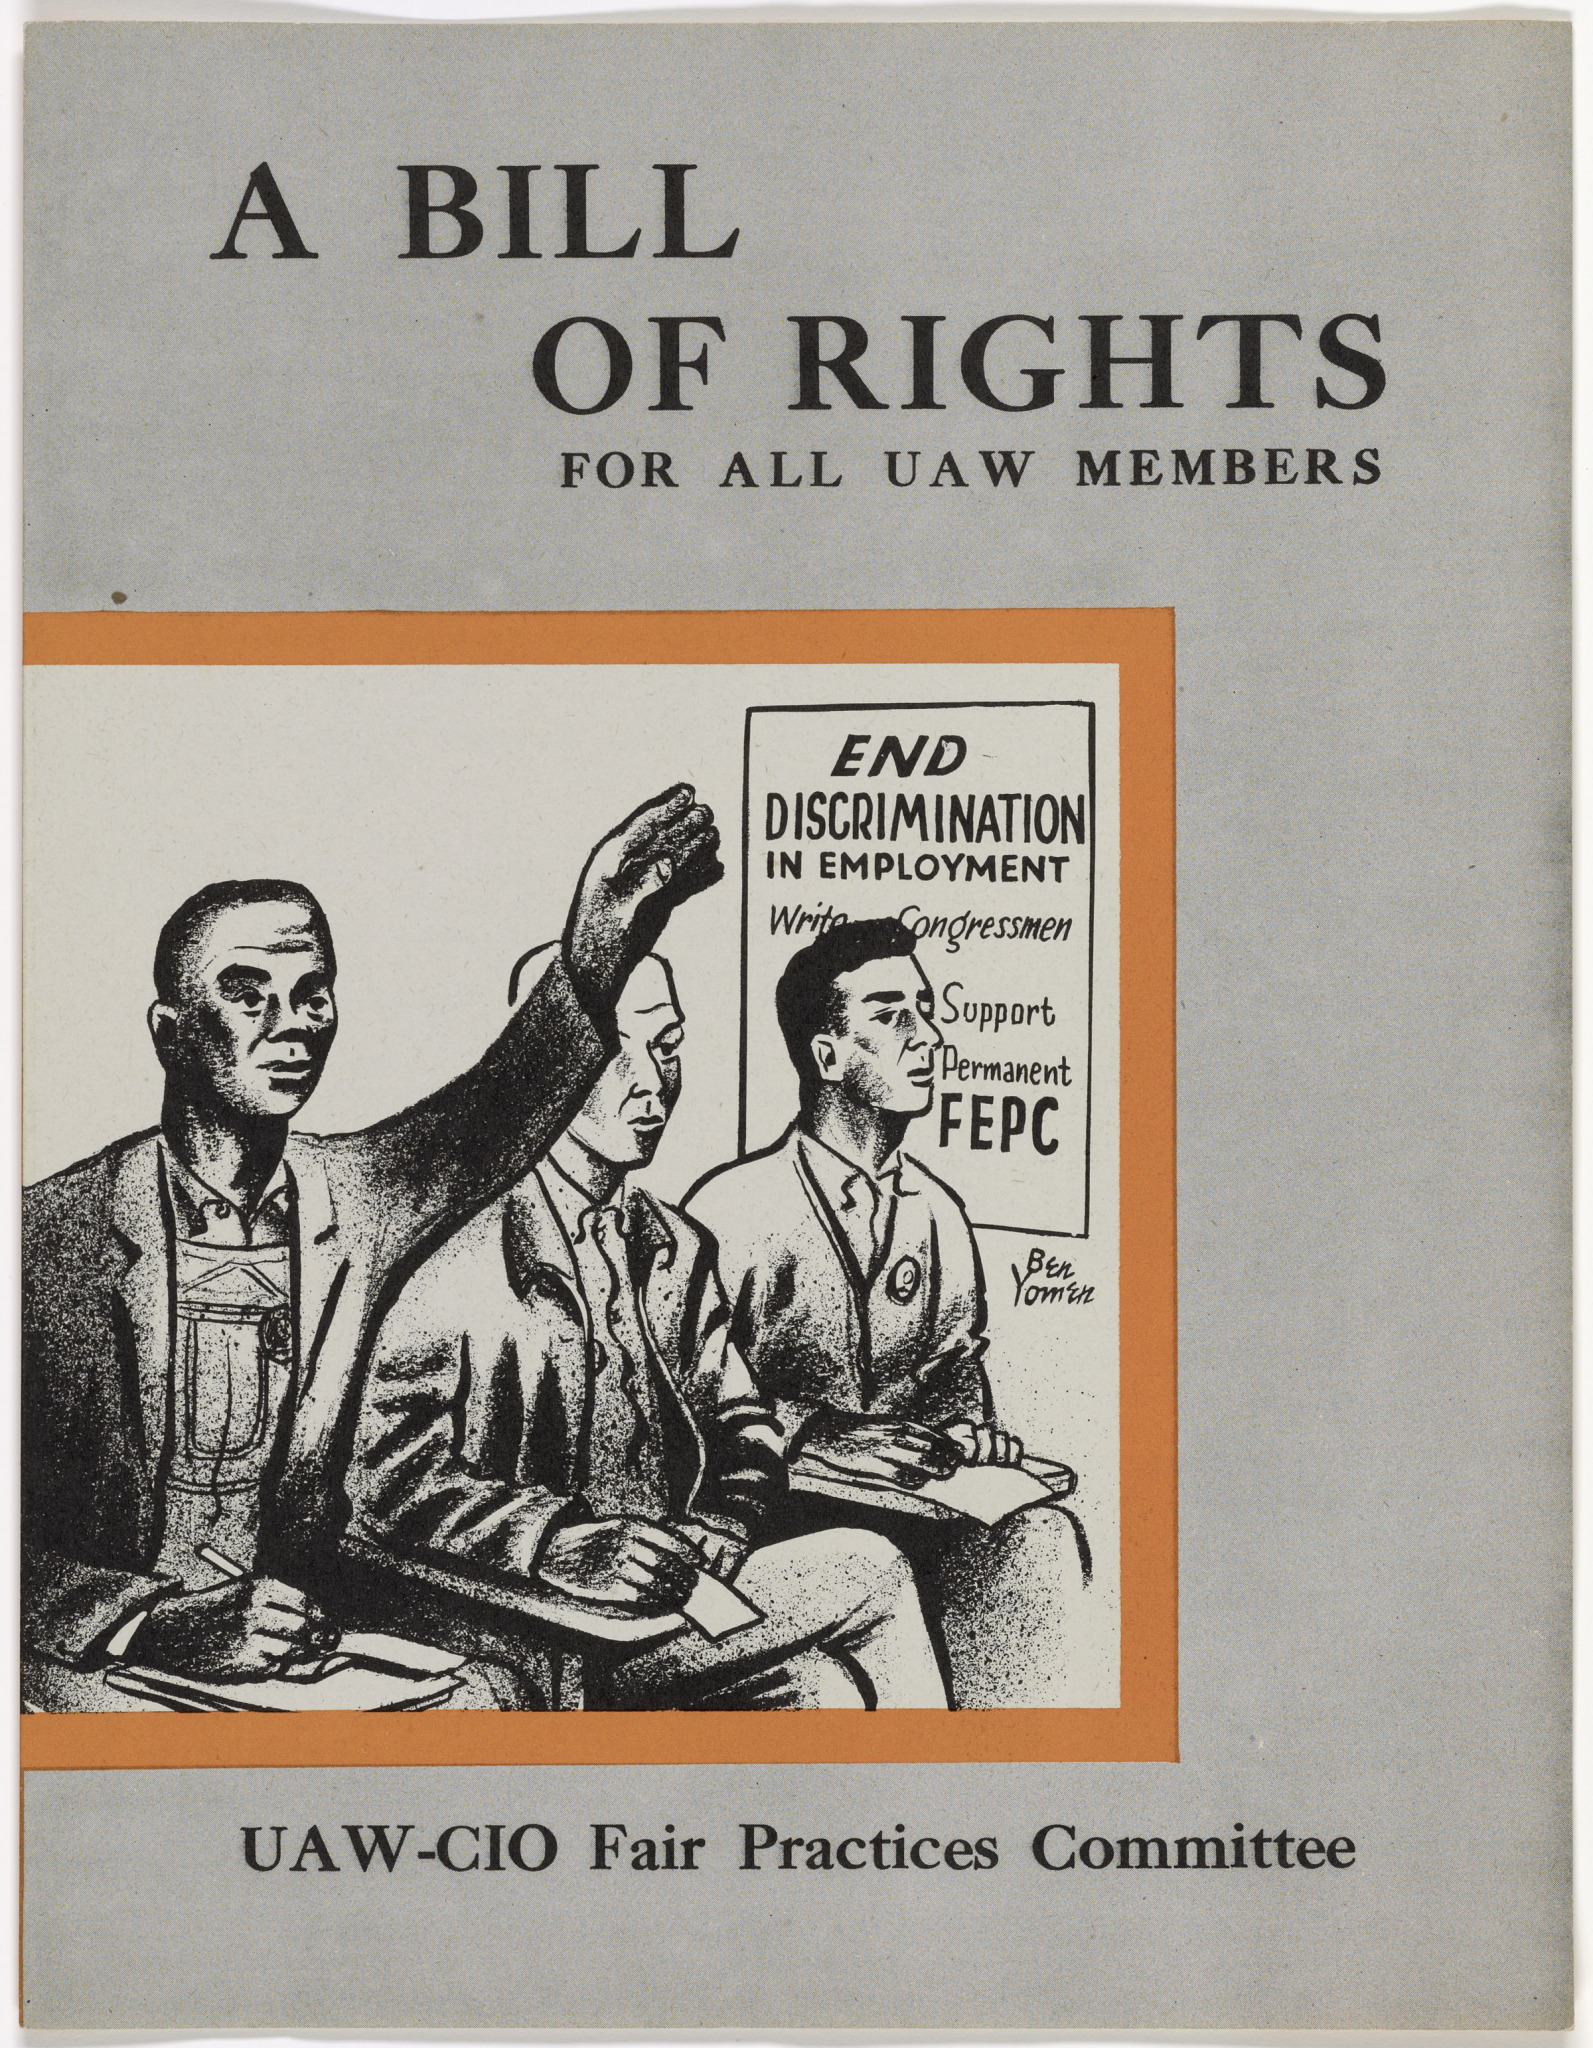 “A Bill of Rights for all UAW Members”